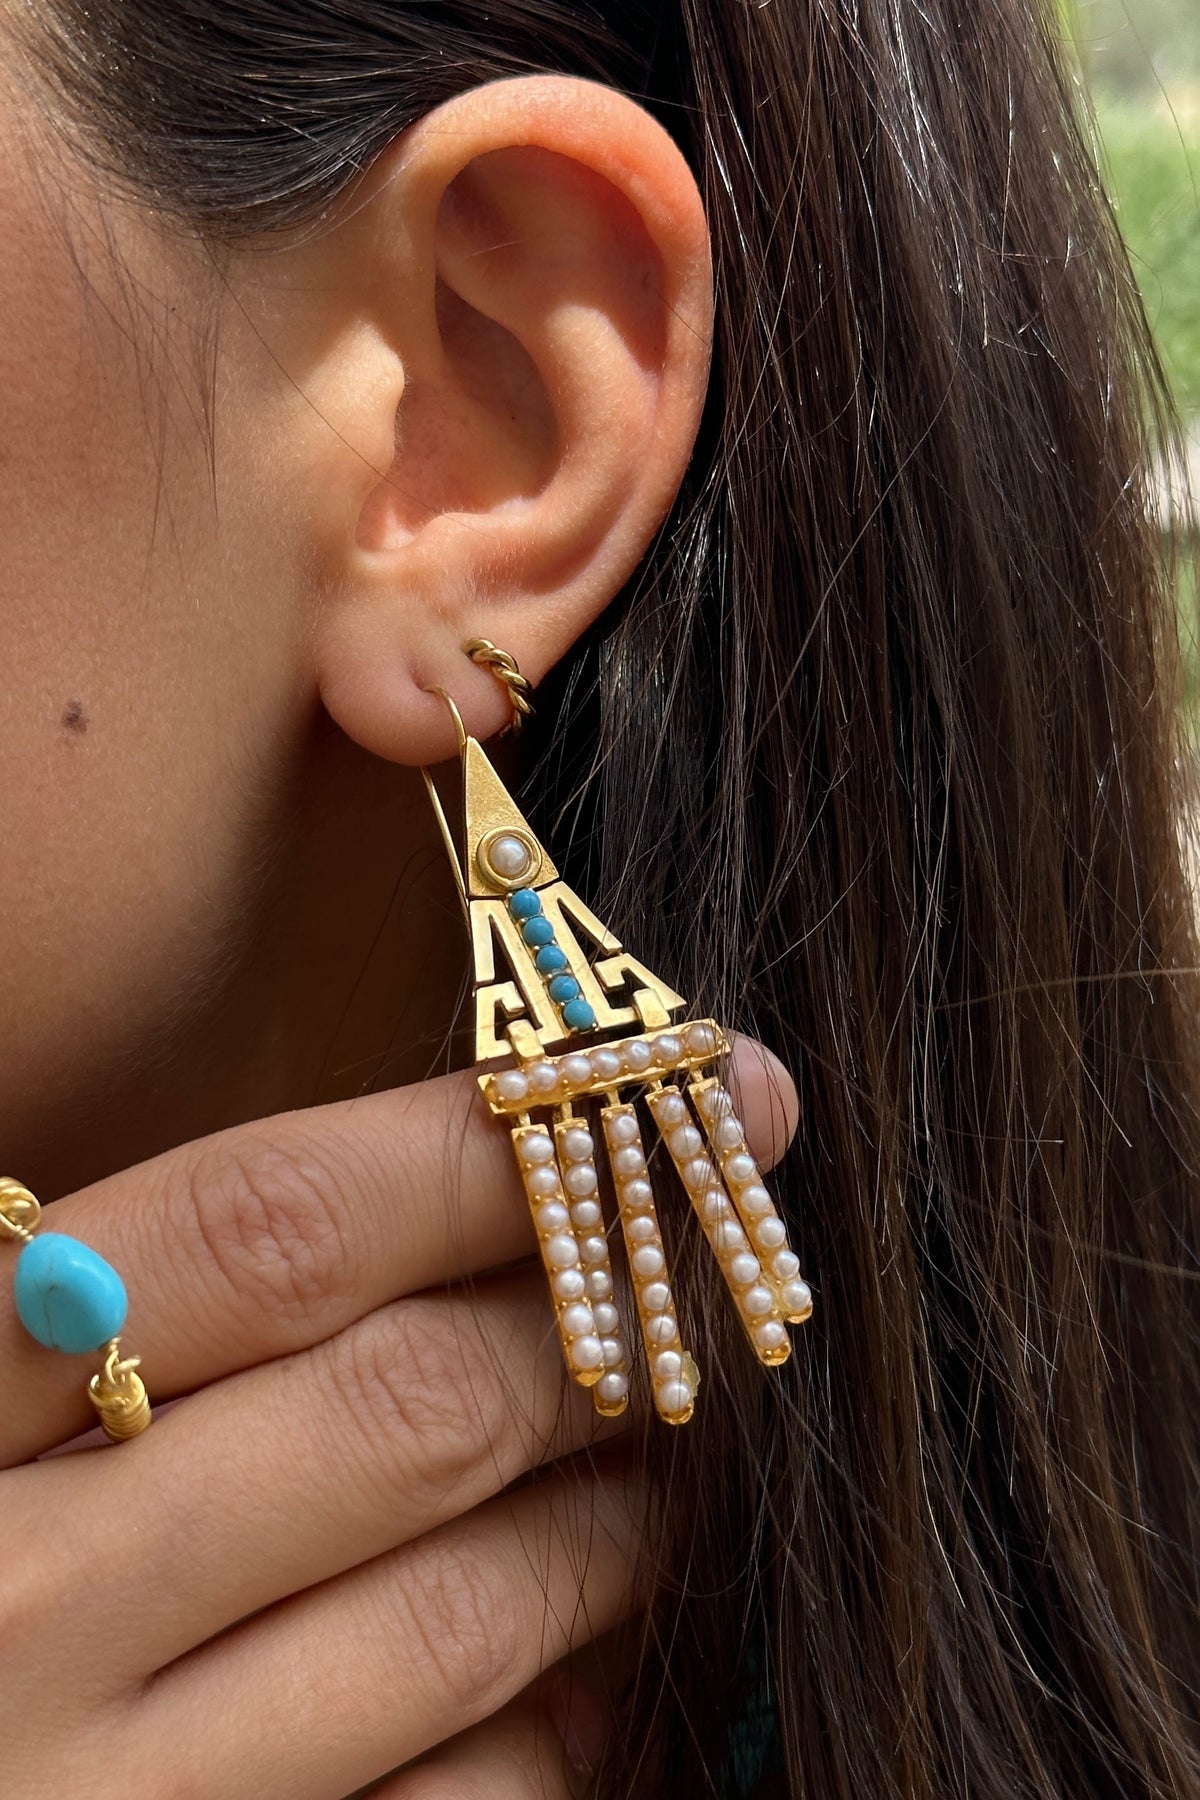 EARRINGS "DAISY" GOLD/PEARLS/TURQUOISE